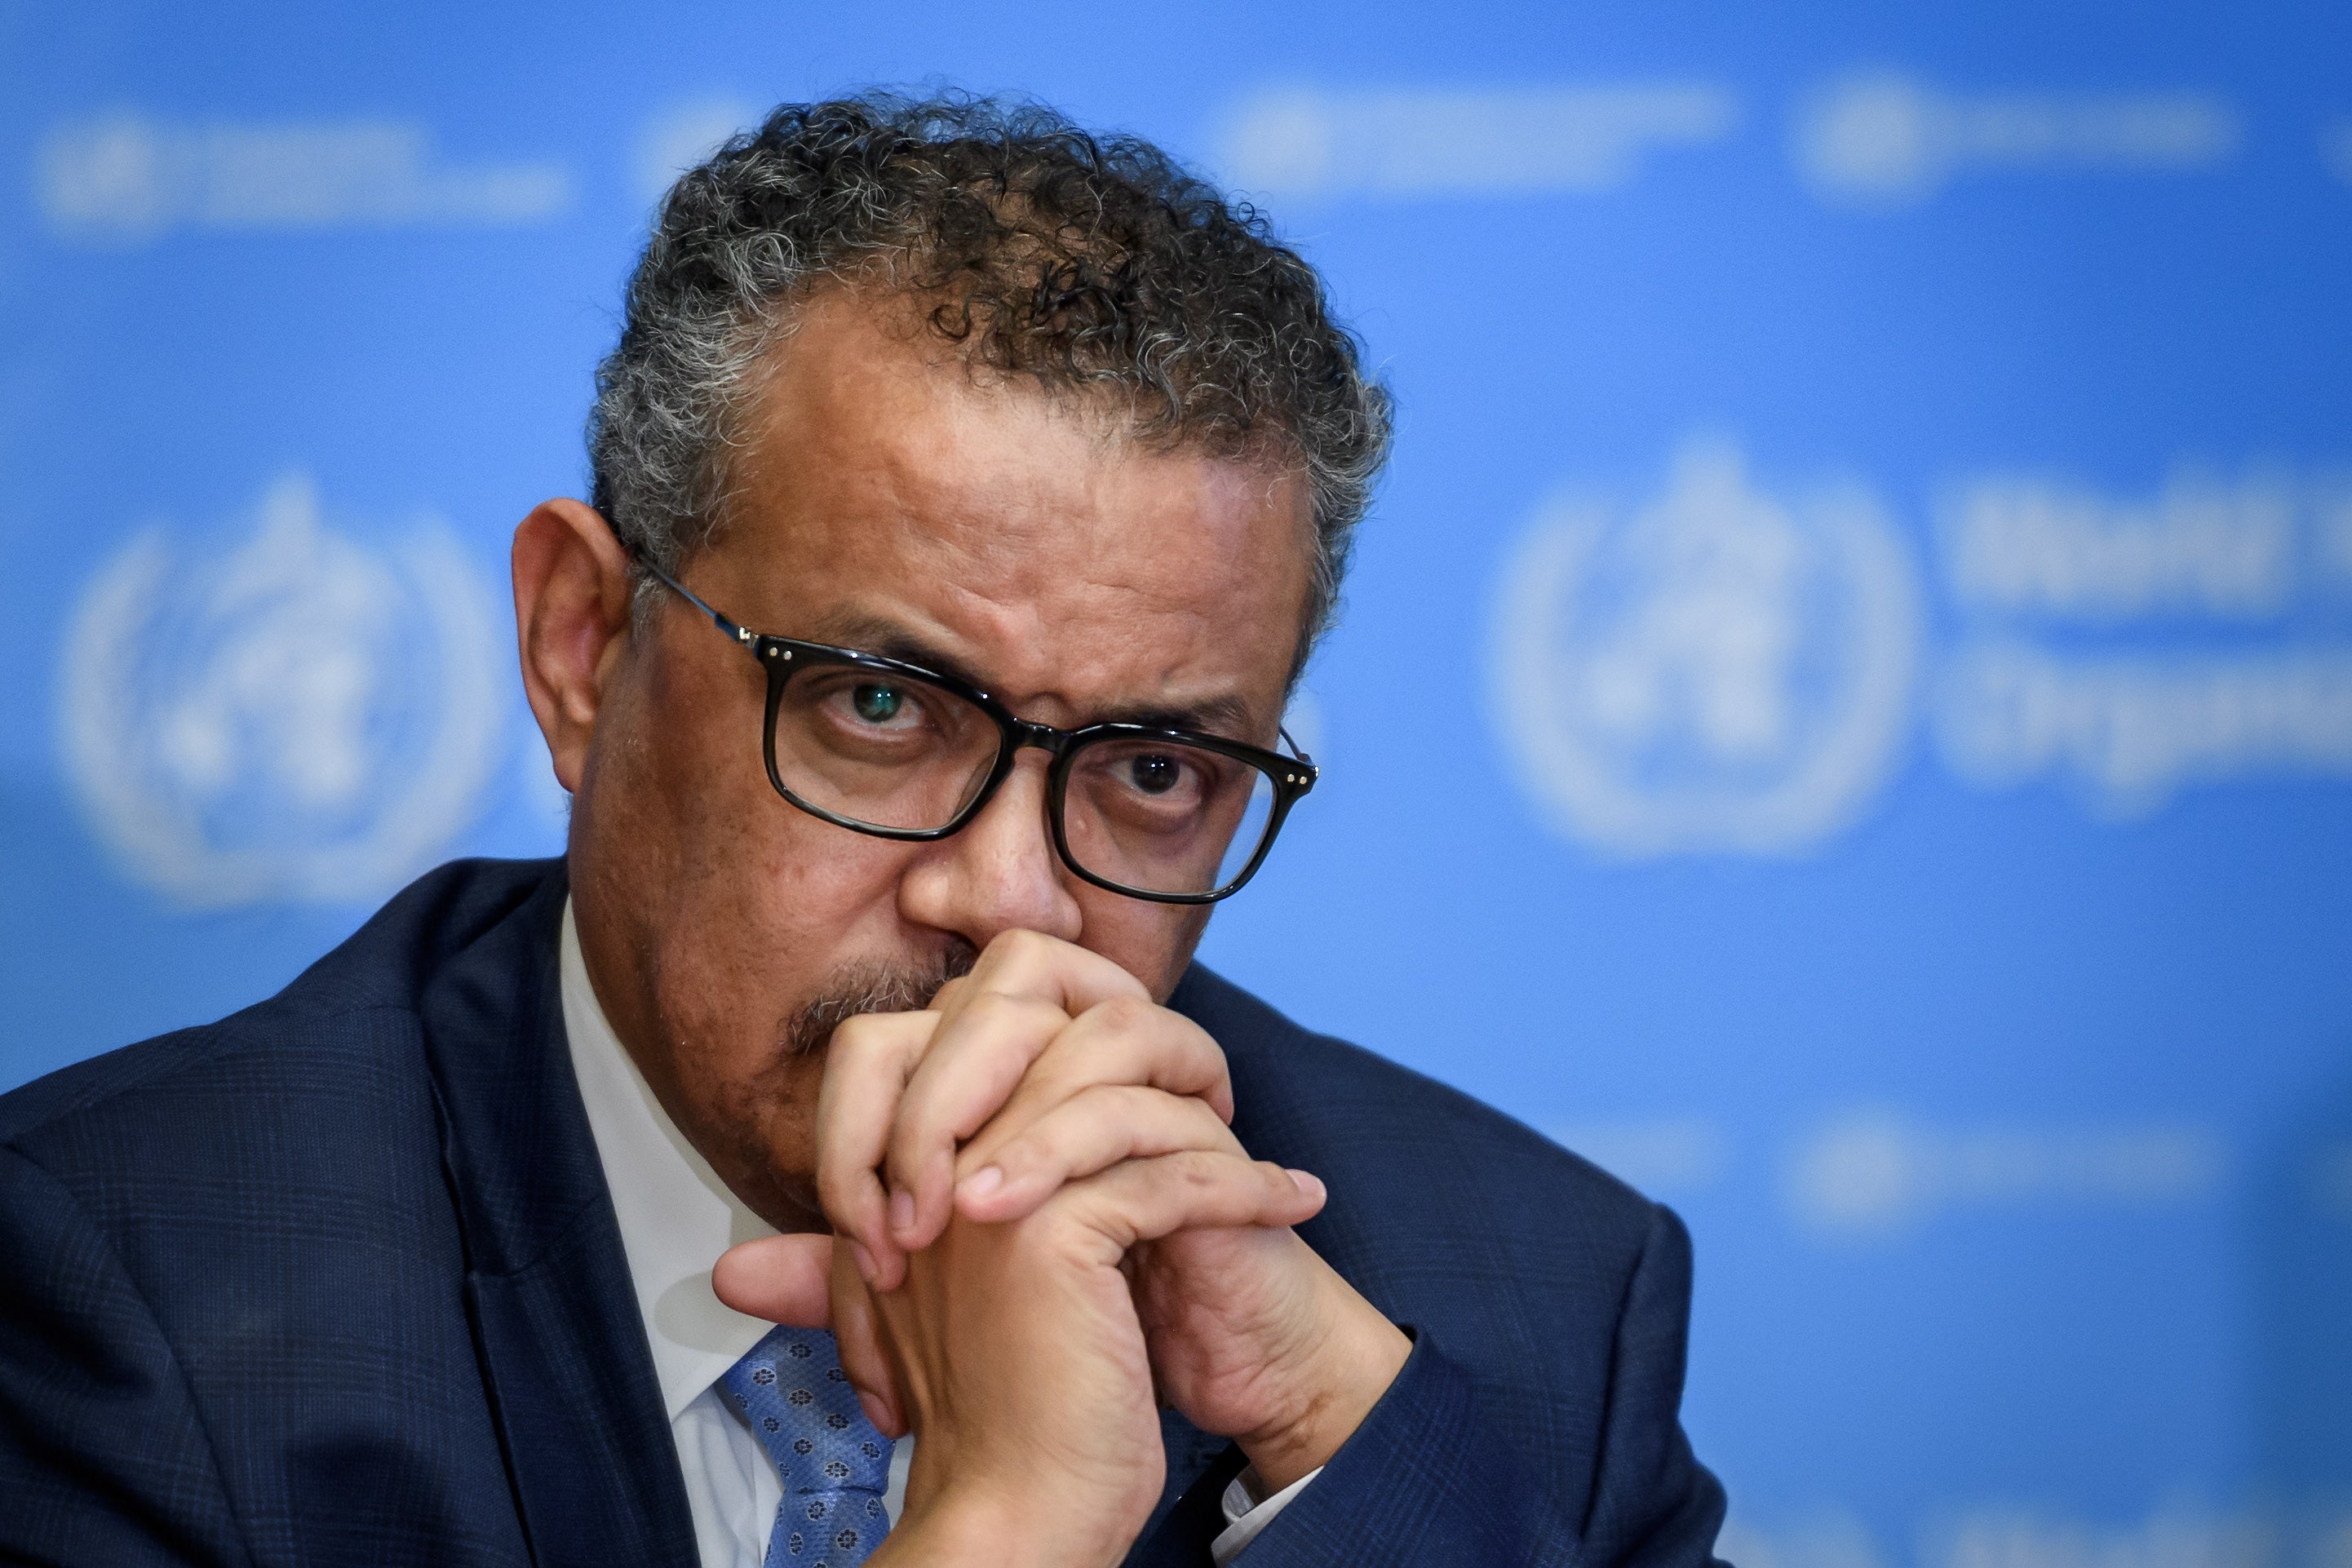 The WHO usually works behind the scenes, but in 2020, Tedros Adhanom Ghebreyesus was launched onto the world stage